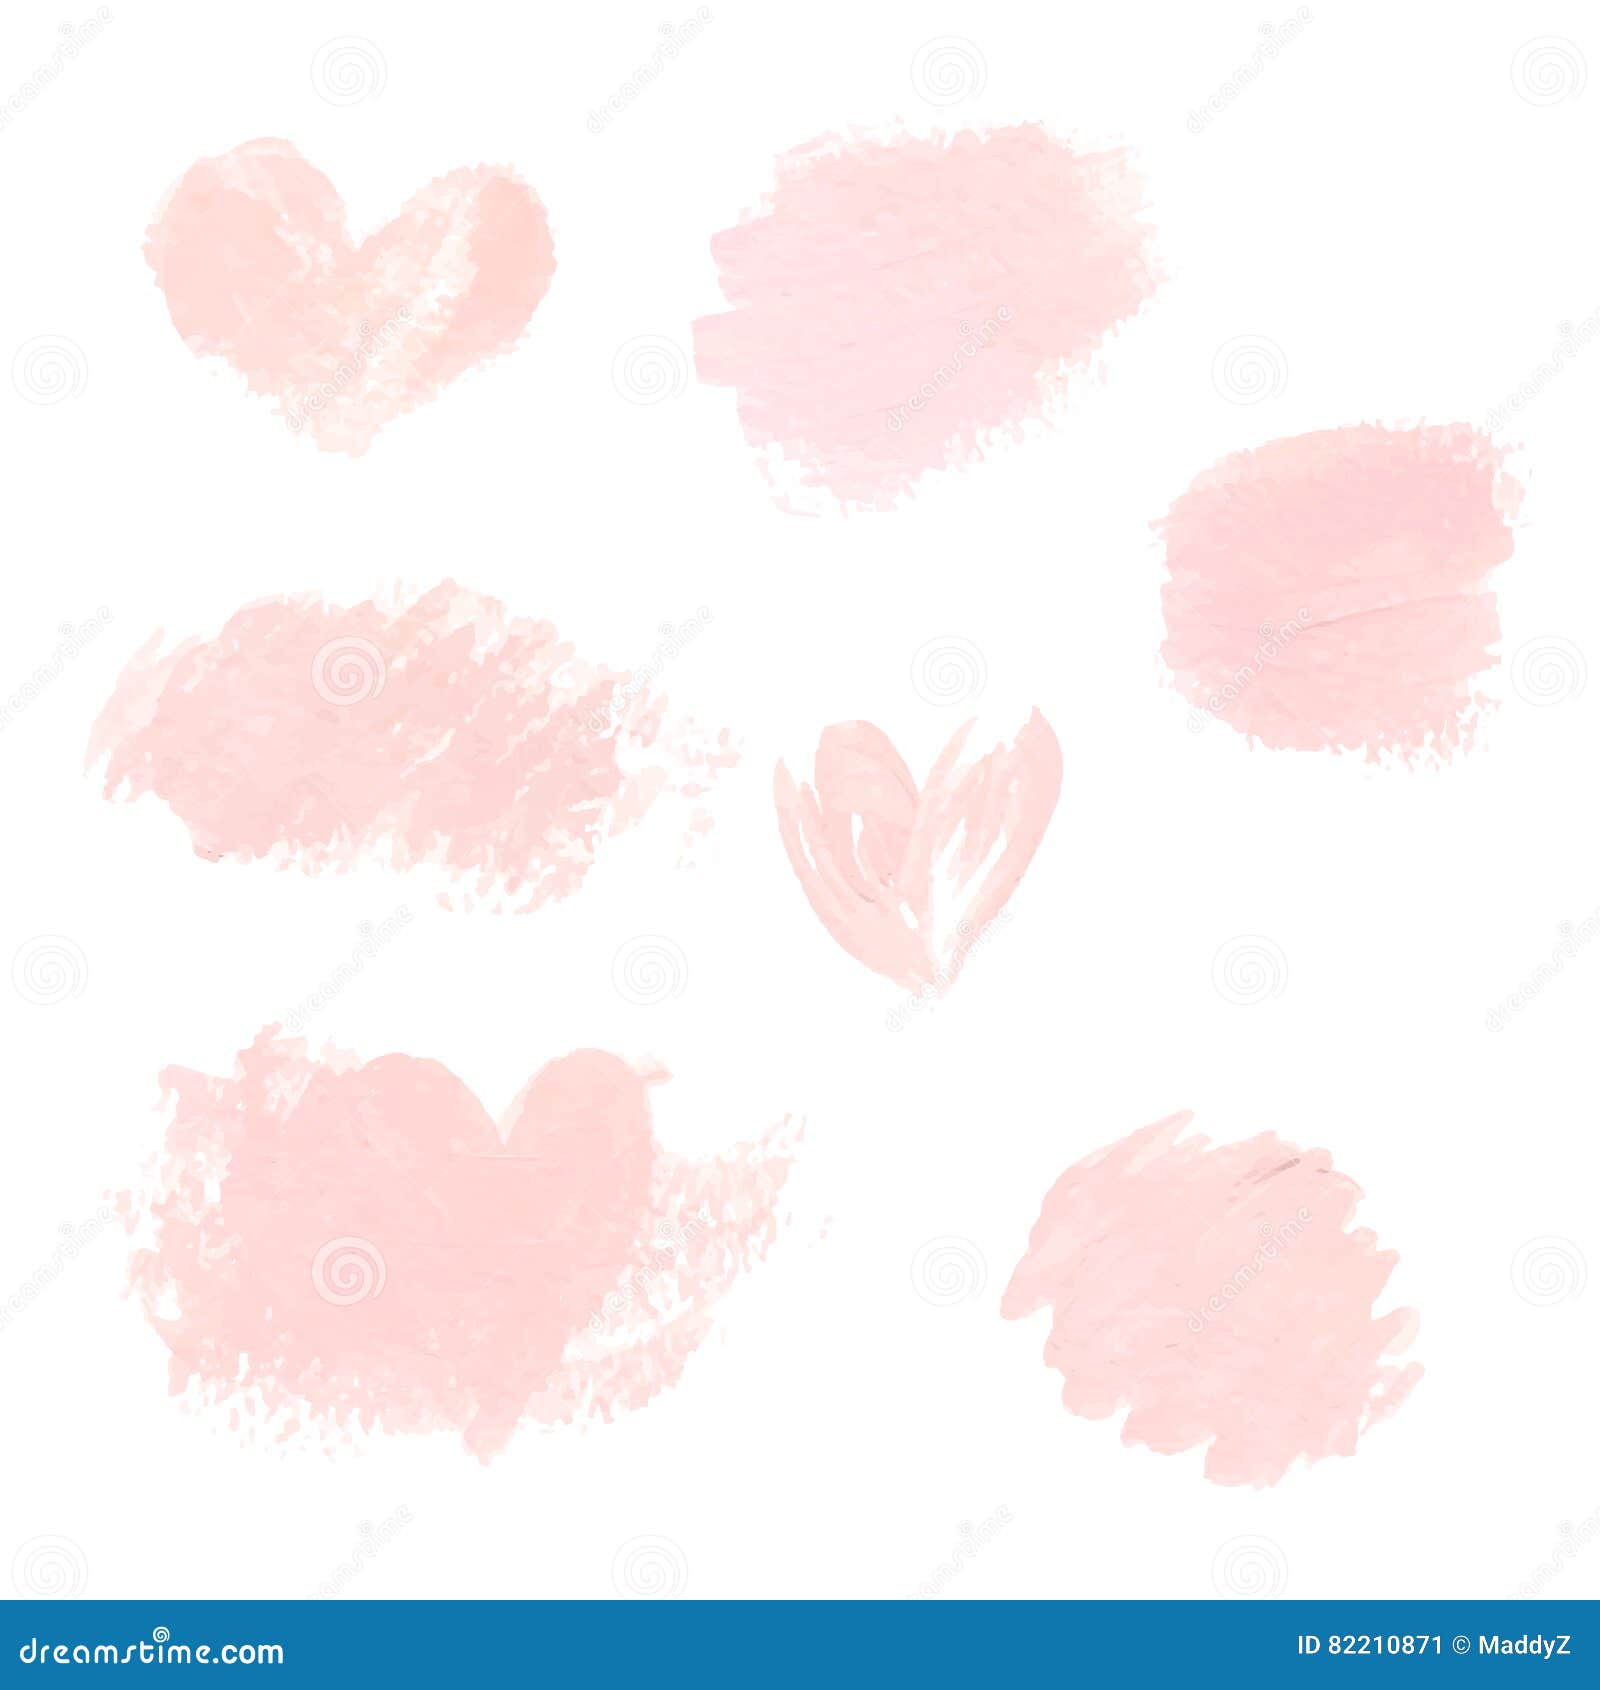 Light Pink Pastel Acrylic Brush Strokes Delicate Textures For